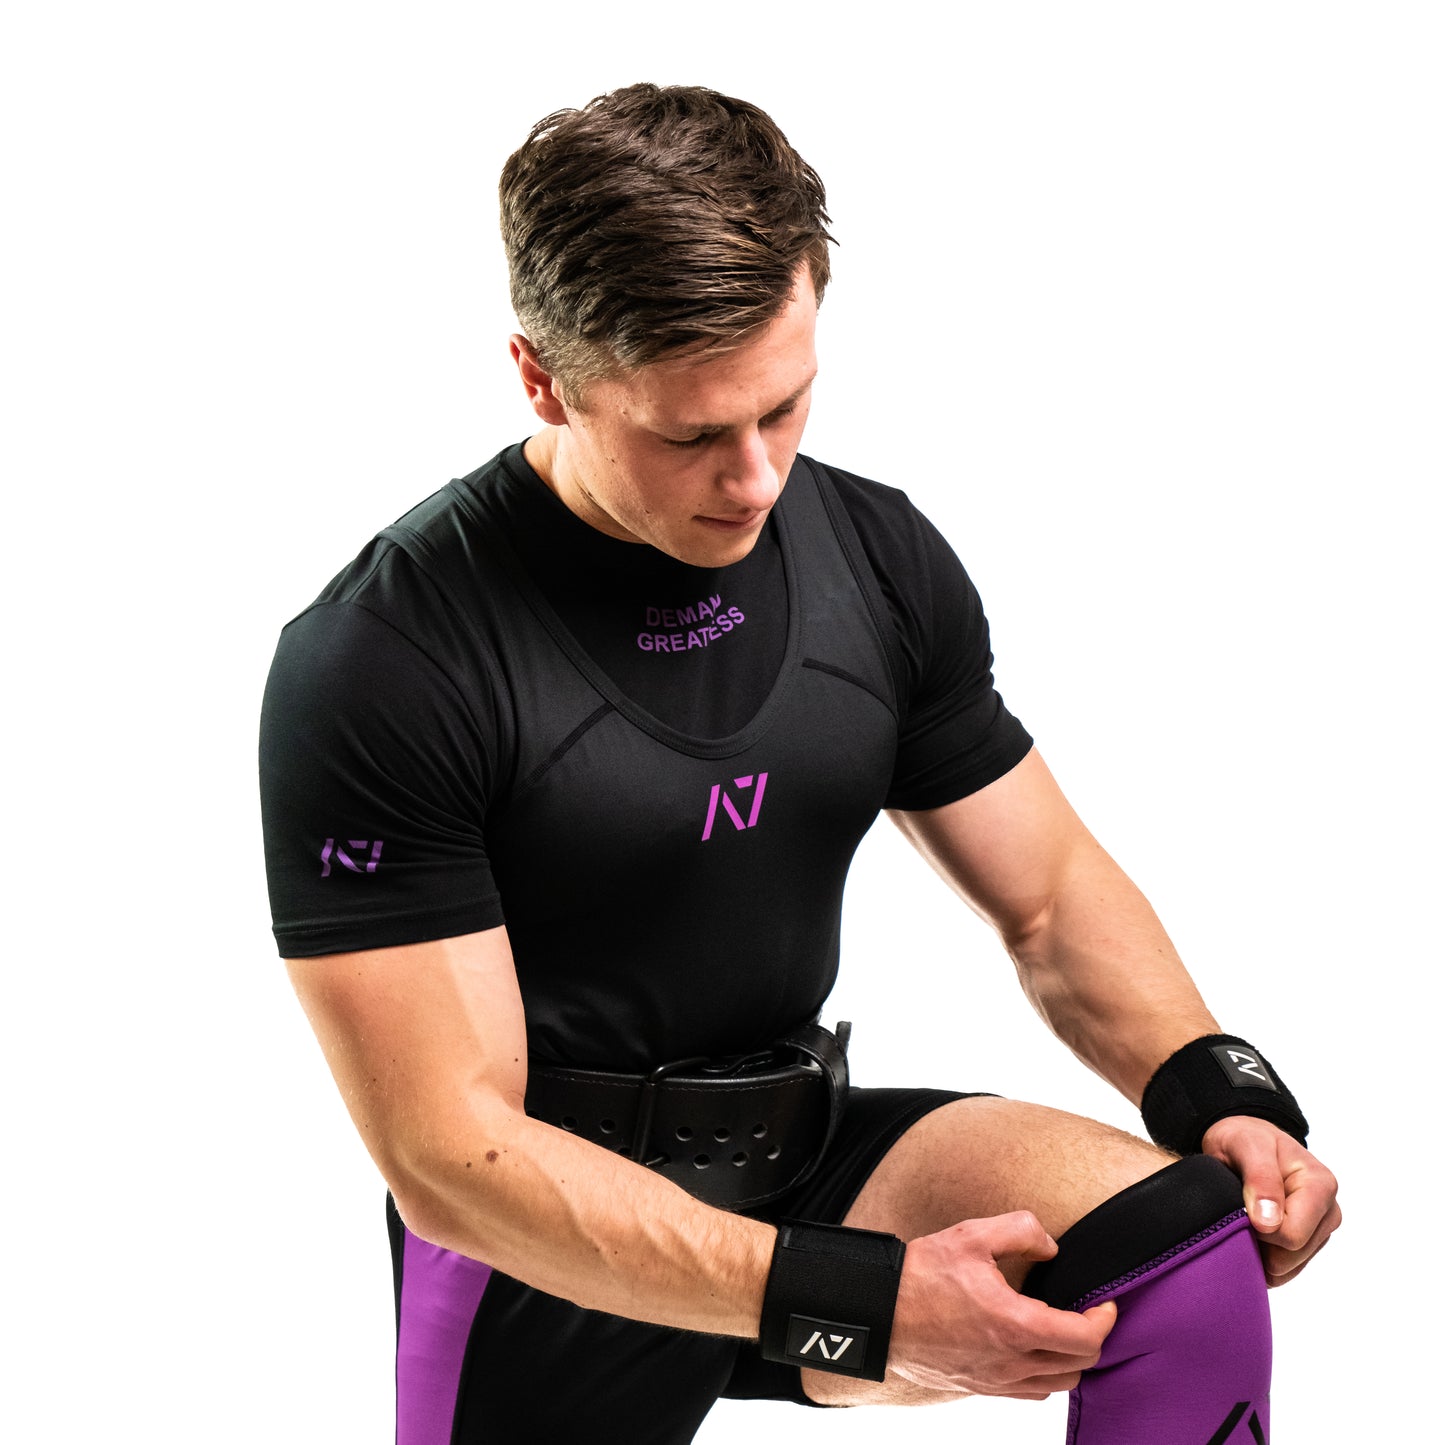 Black and Purple Powerlifting Singlet - IPF Approved